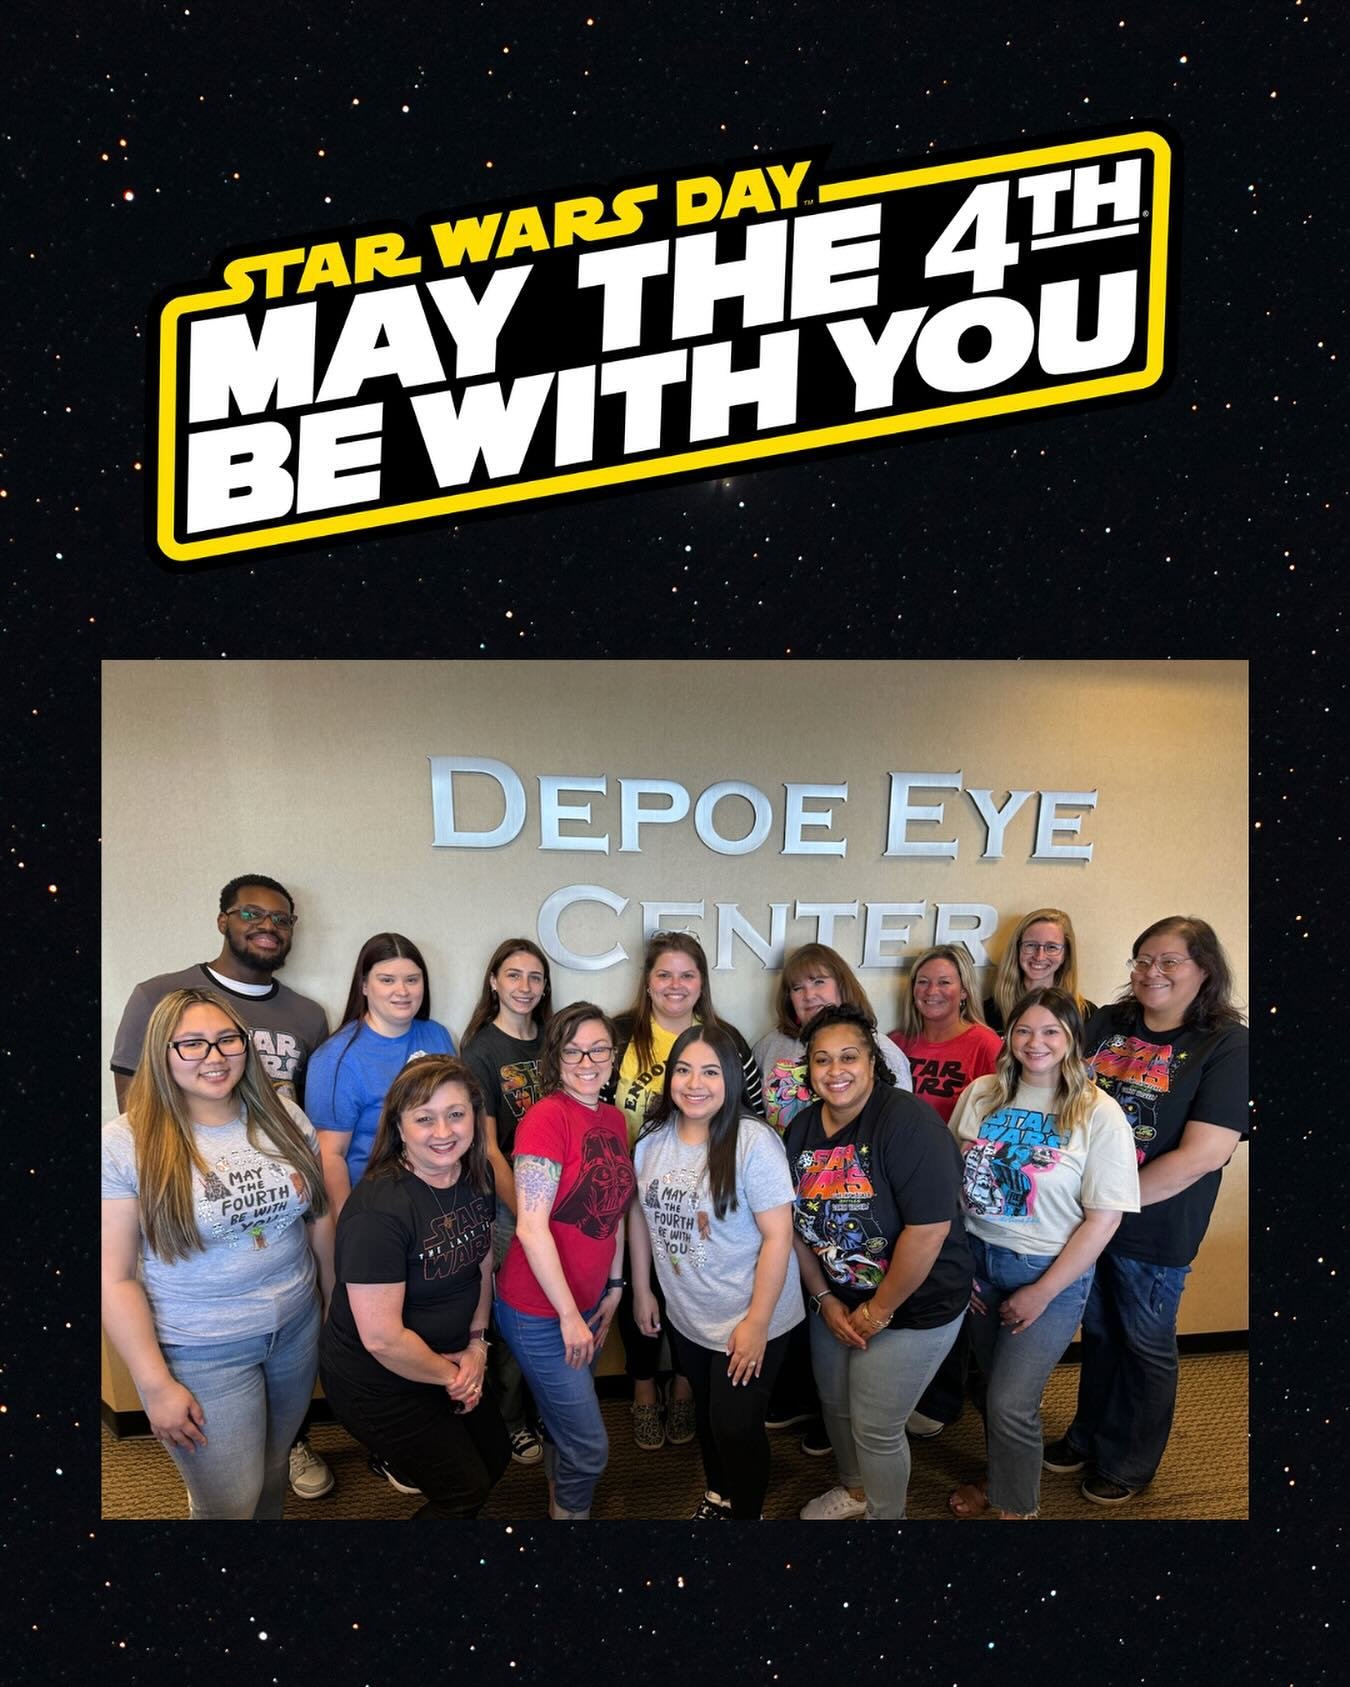 Happy #starwarsday 🌟 May the 4th be with you! - The DePoe Eye Center Team